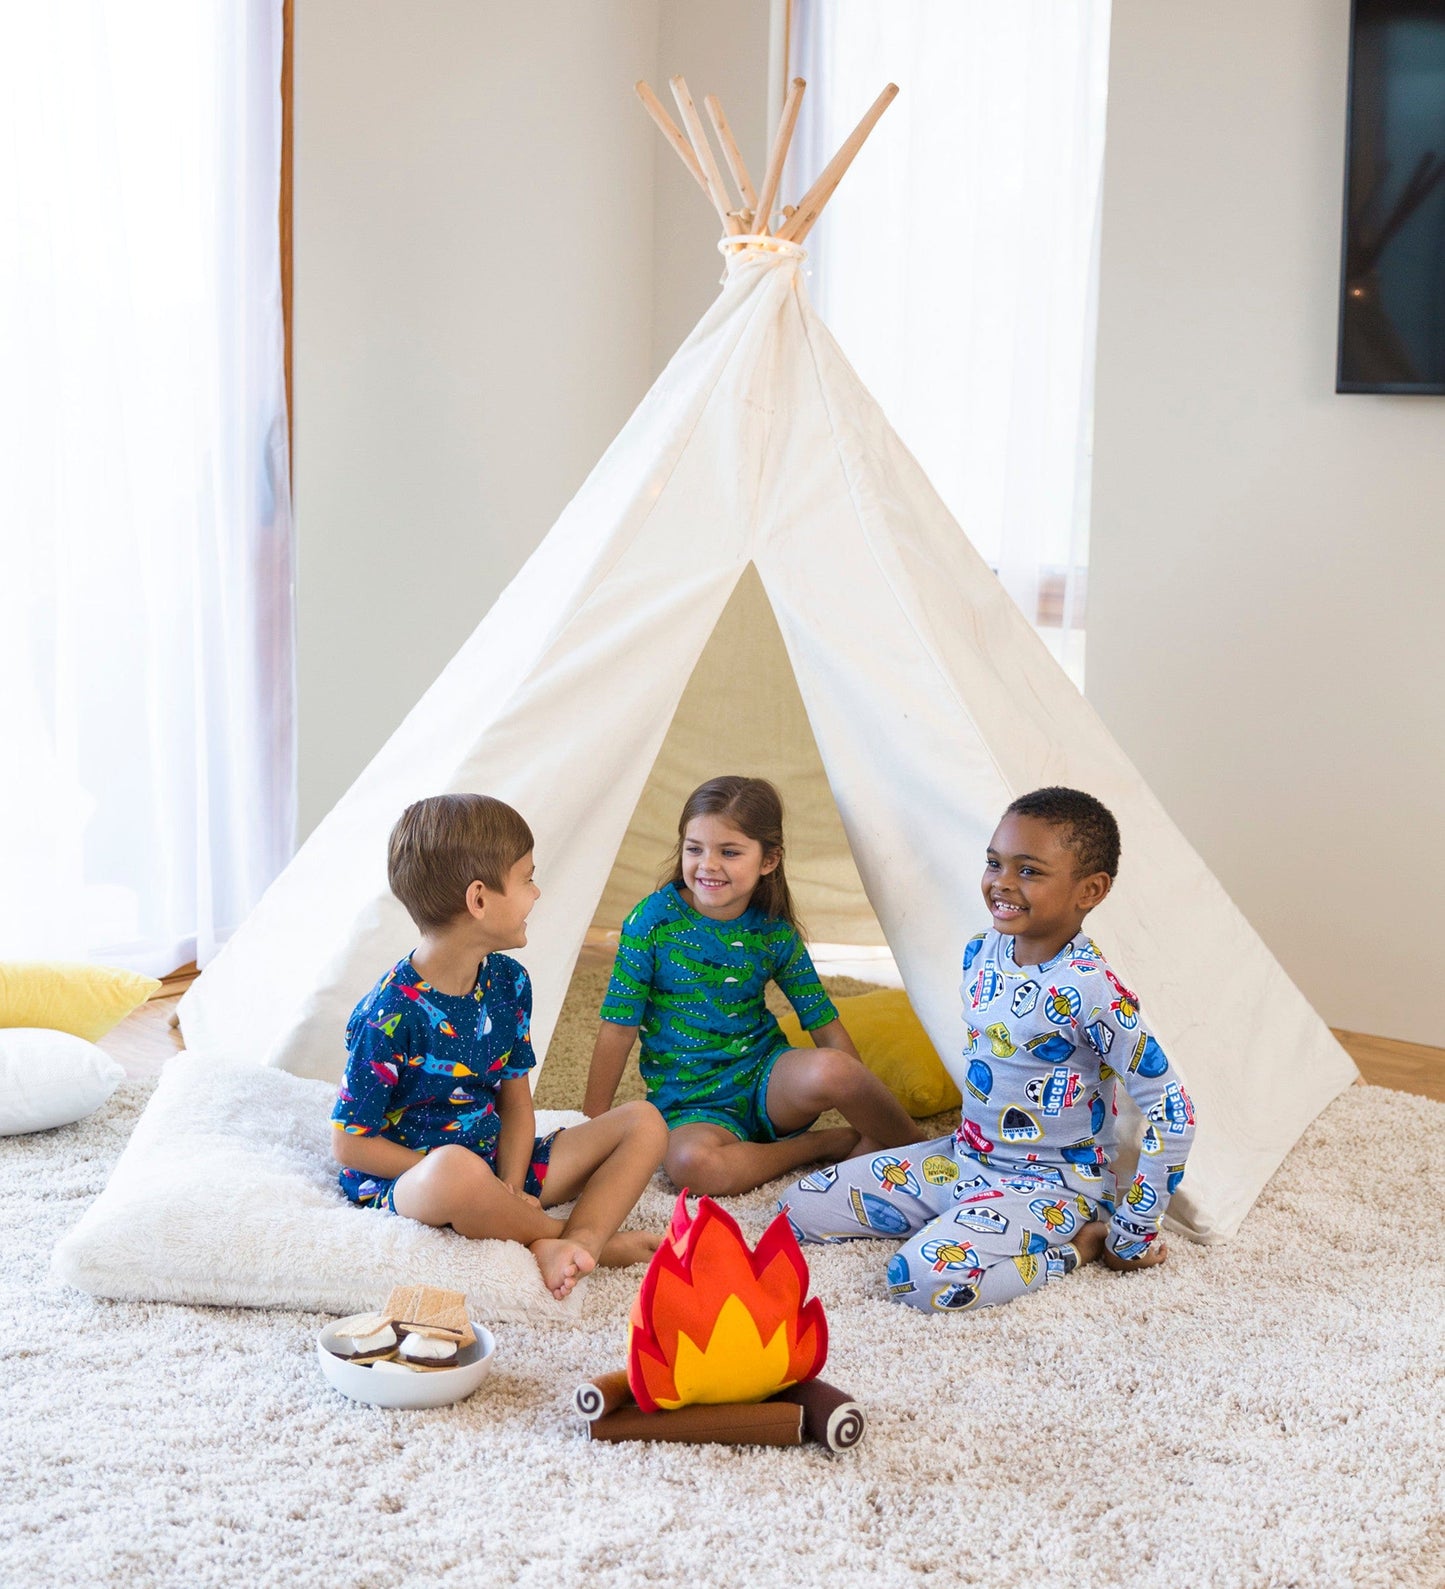 7-Foot Cotton Canvas Indoor and Outdoor Tent with Lights